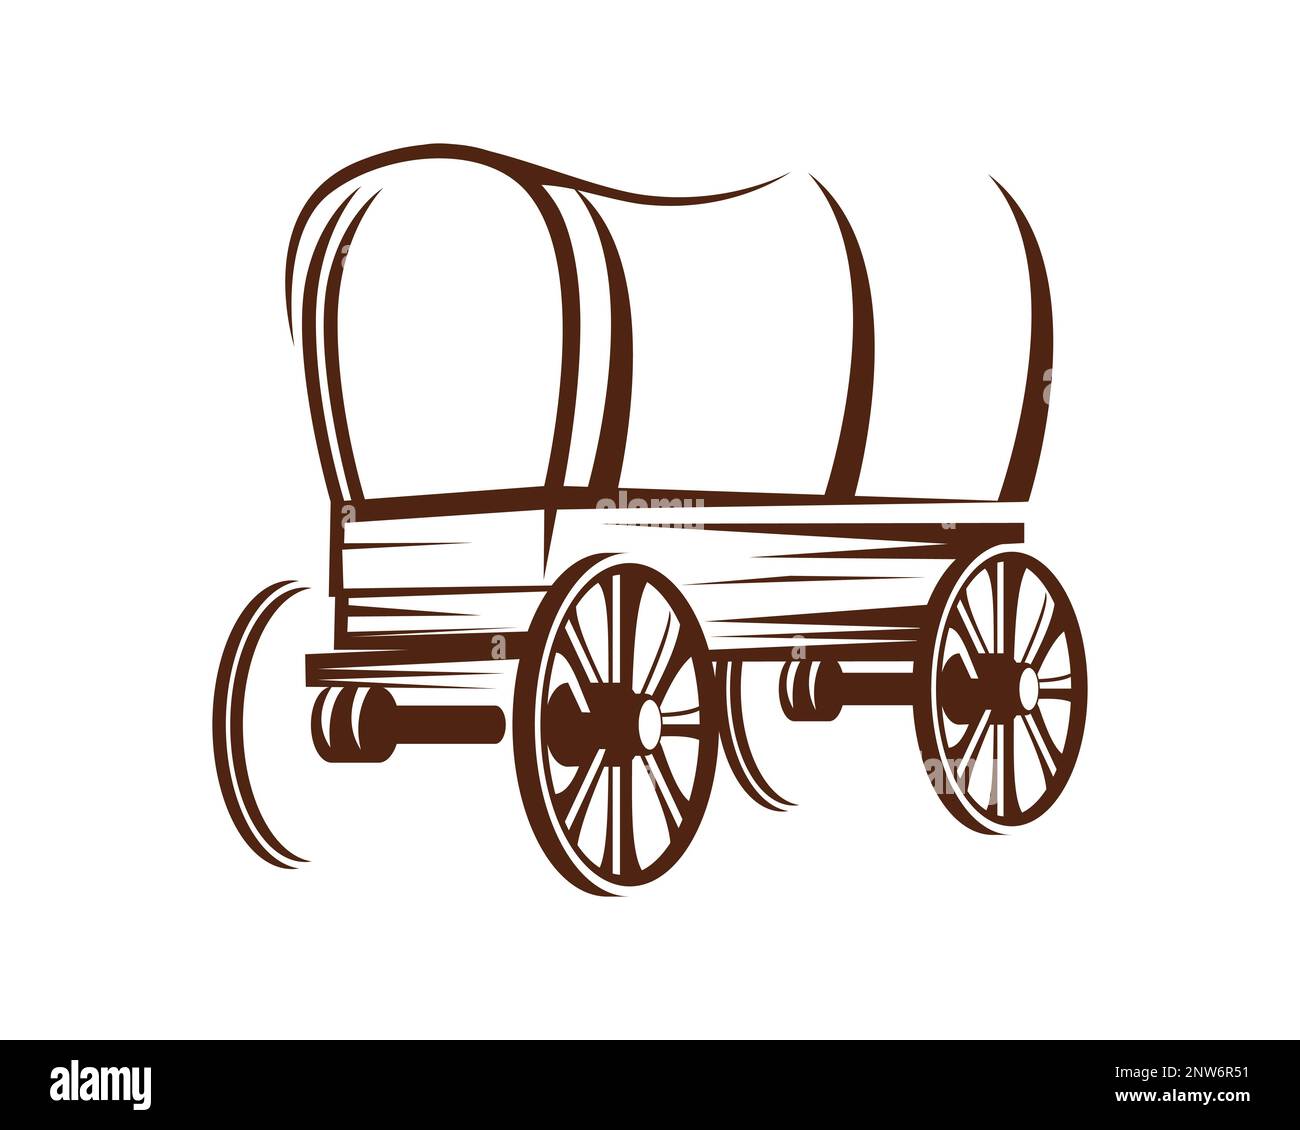 Wagon Illustration with Silhouette Style Stock Vector